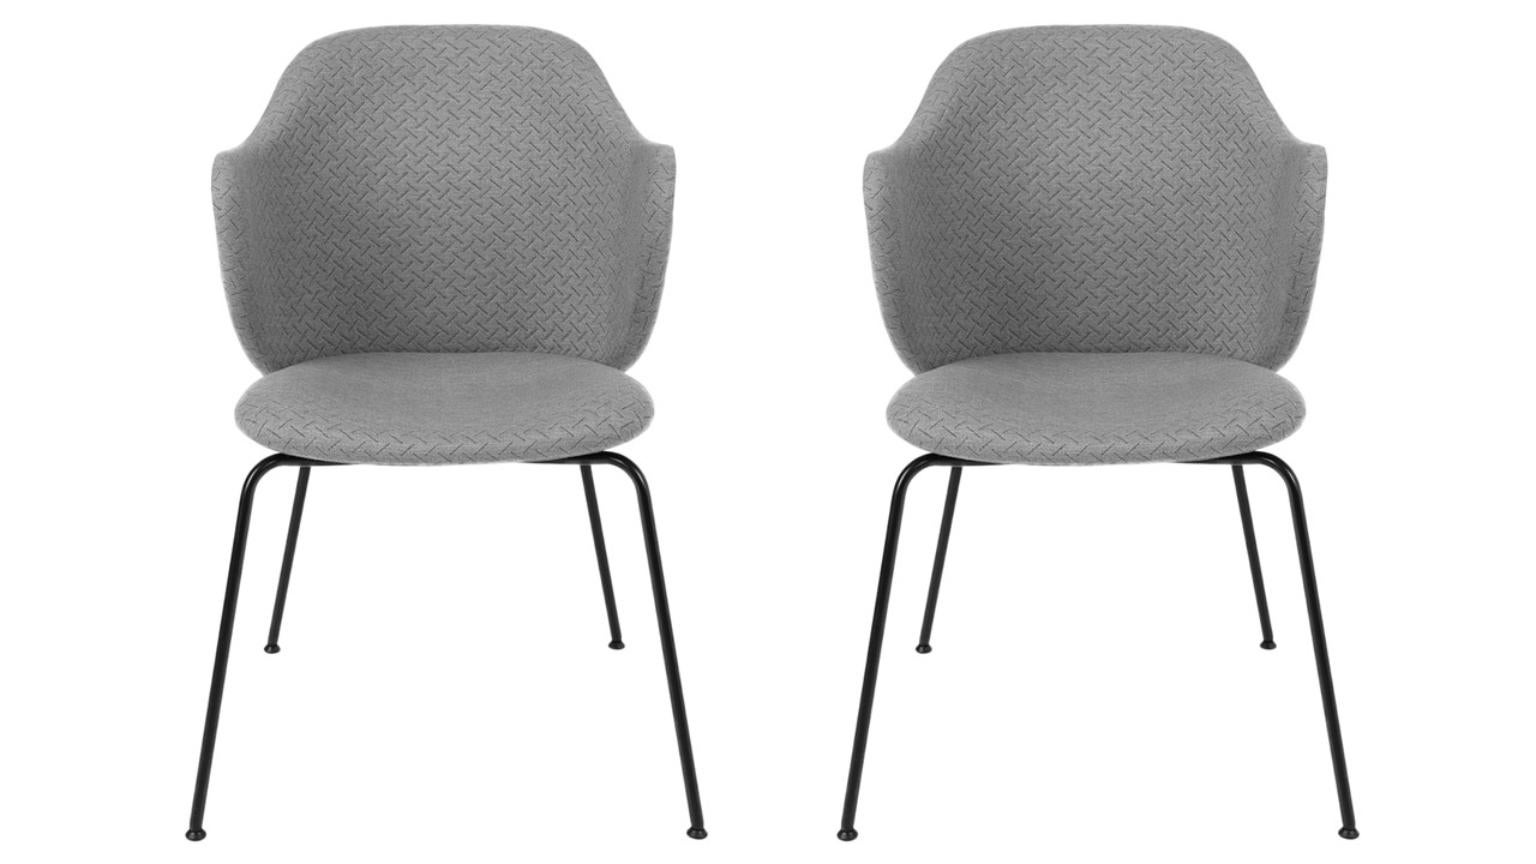 Set of 2 grey Jupiter Lassen chairs by Lassen.
Dimensions: W 58 x D 60 x H 88 cm. 
Materials: Textile.

The Lassen Chair by Flemming Lassen, Magnus Sangild and Marianne Viktor was launched in 2018 as an ode to Flemming Lassen’s uncompromising